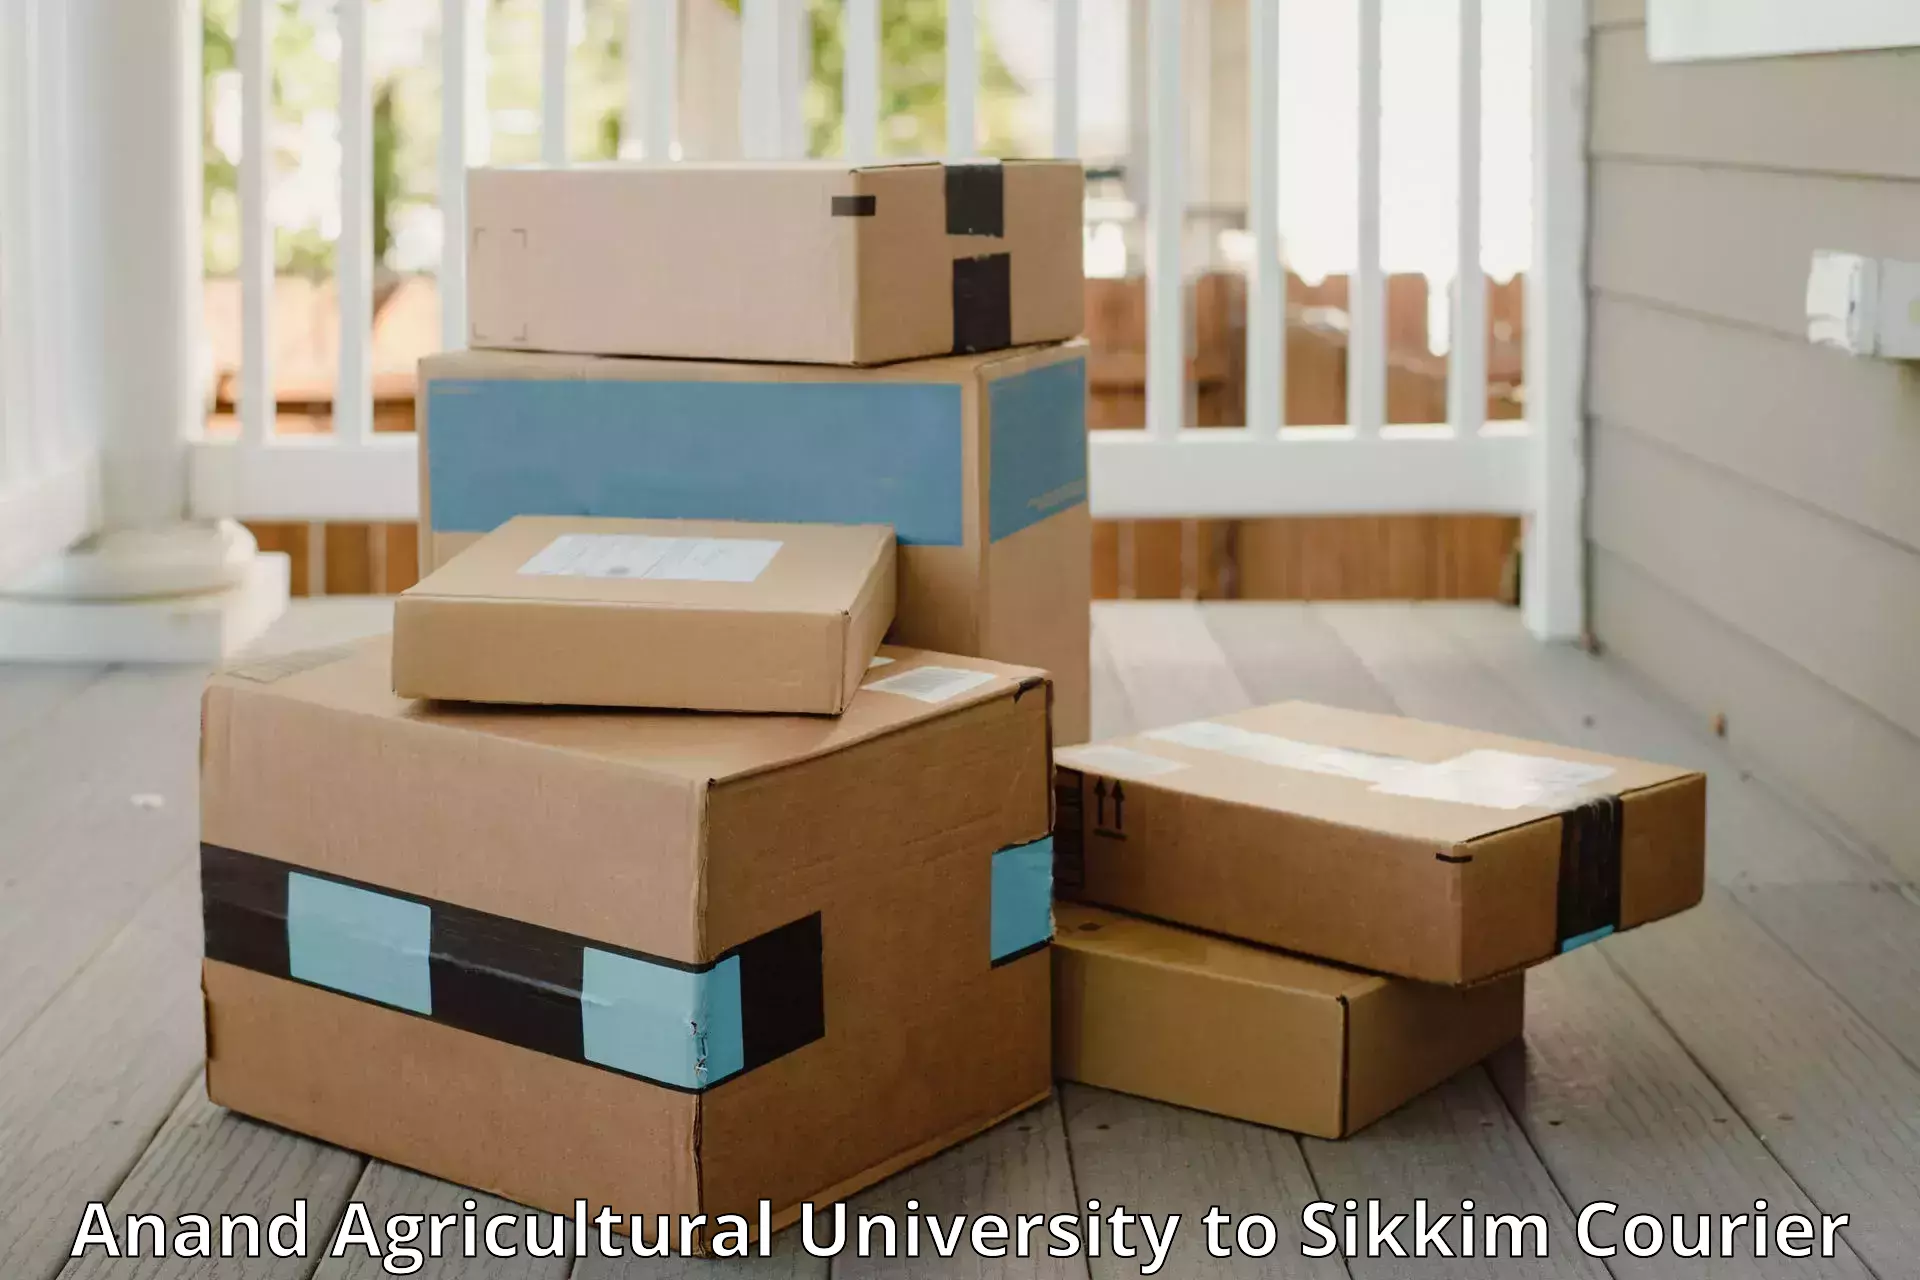 Baggage shipping schedule Anand Agricultural University to Mangan